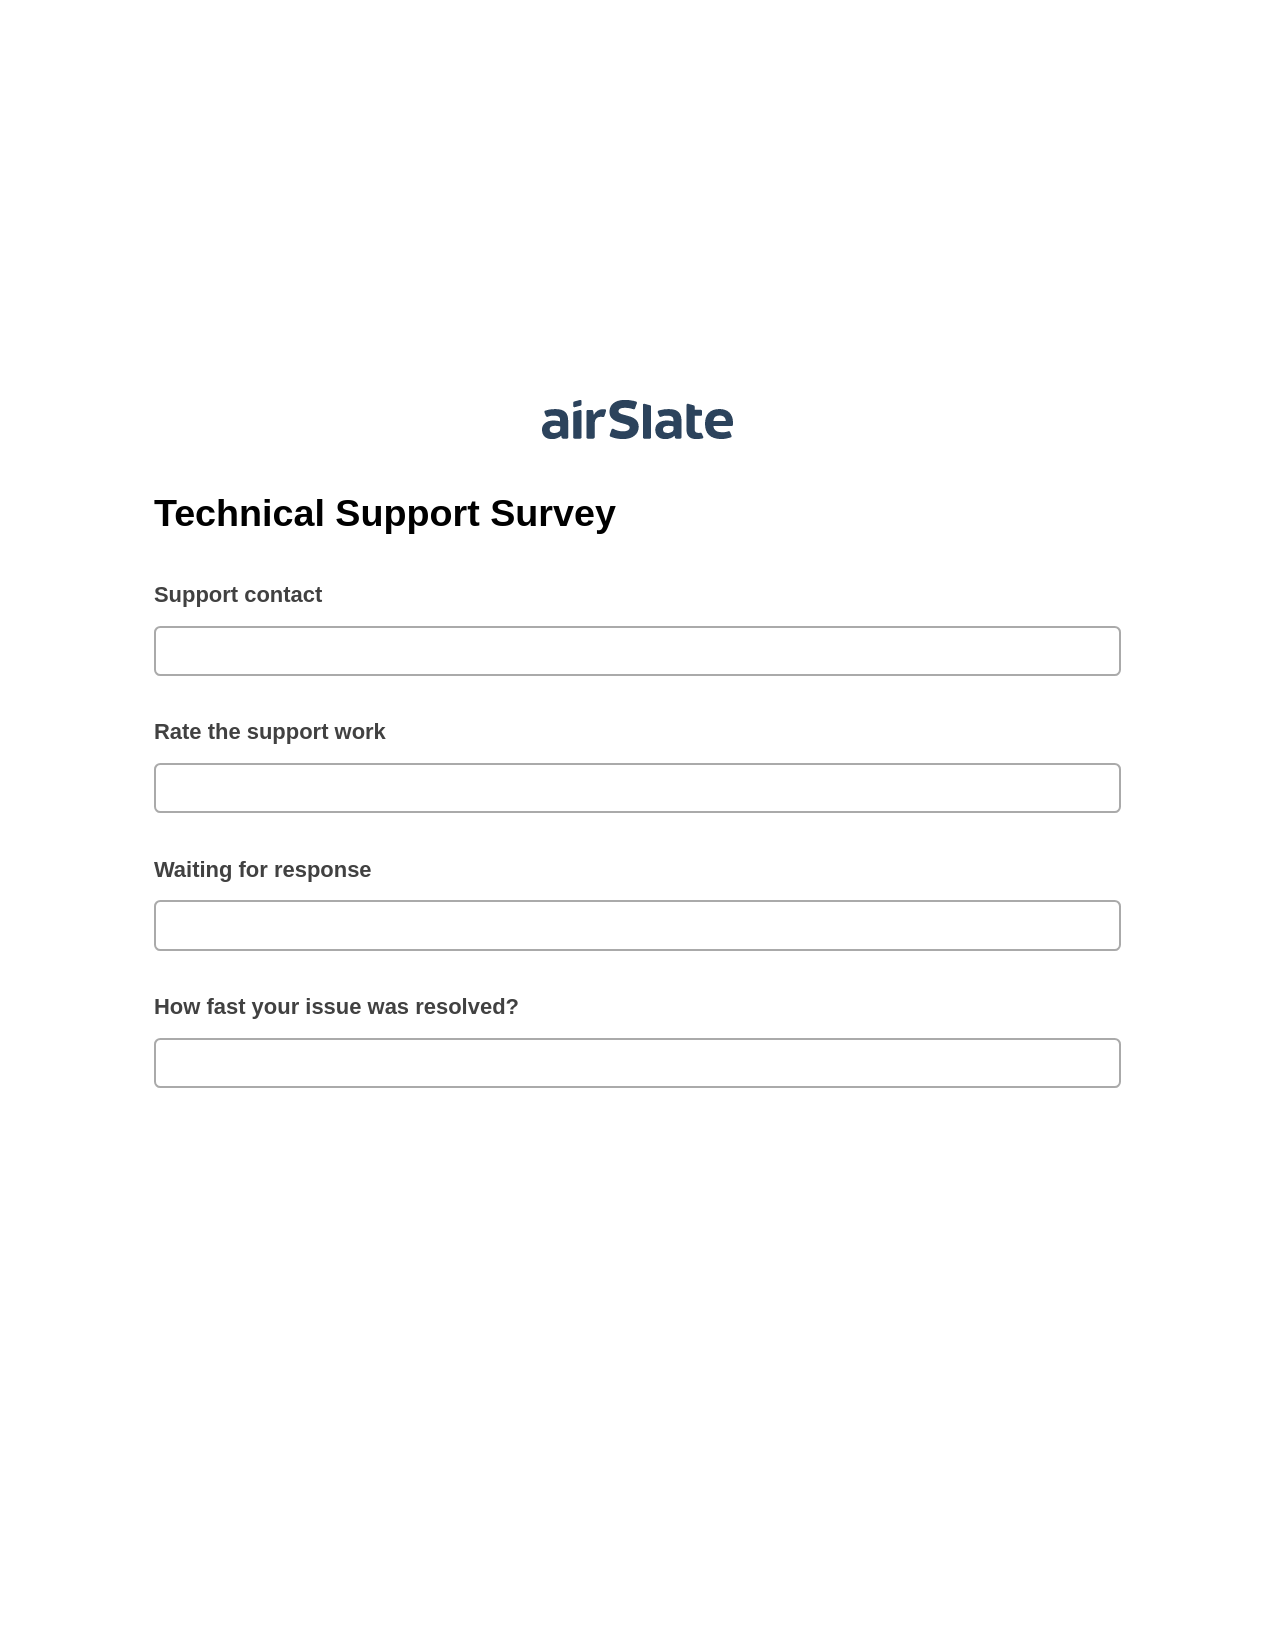 Multirole Technical Support Survey Pre-fill from another Slate Bot, Send Mailchimp Campaign Bot, Archive to Dropbox Bot